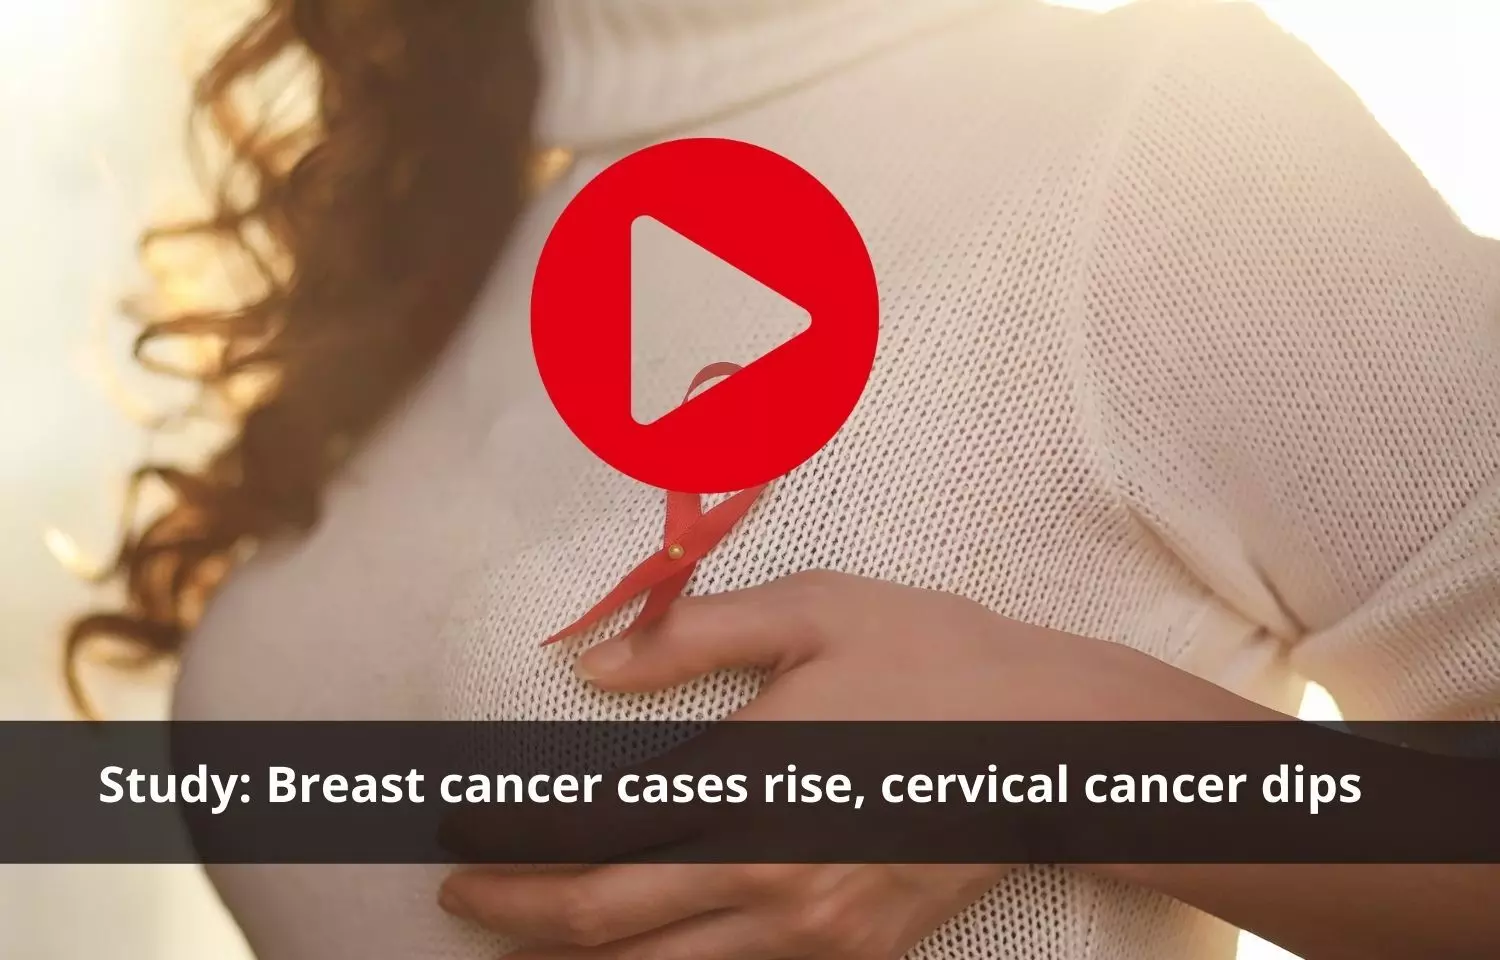 Breast cancer cases rise, cervical cancer dips, says study